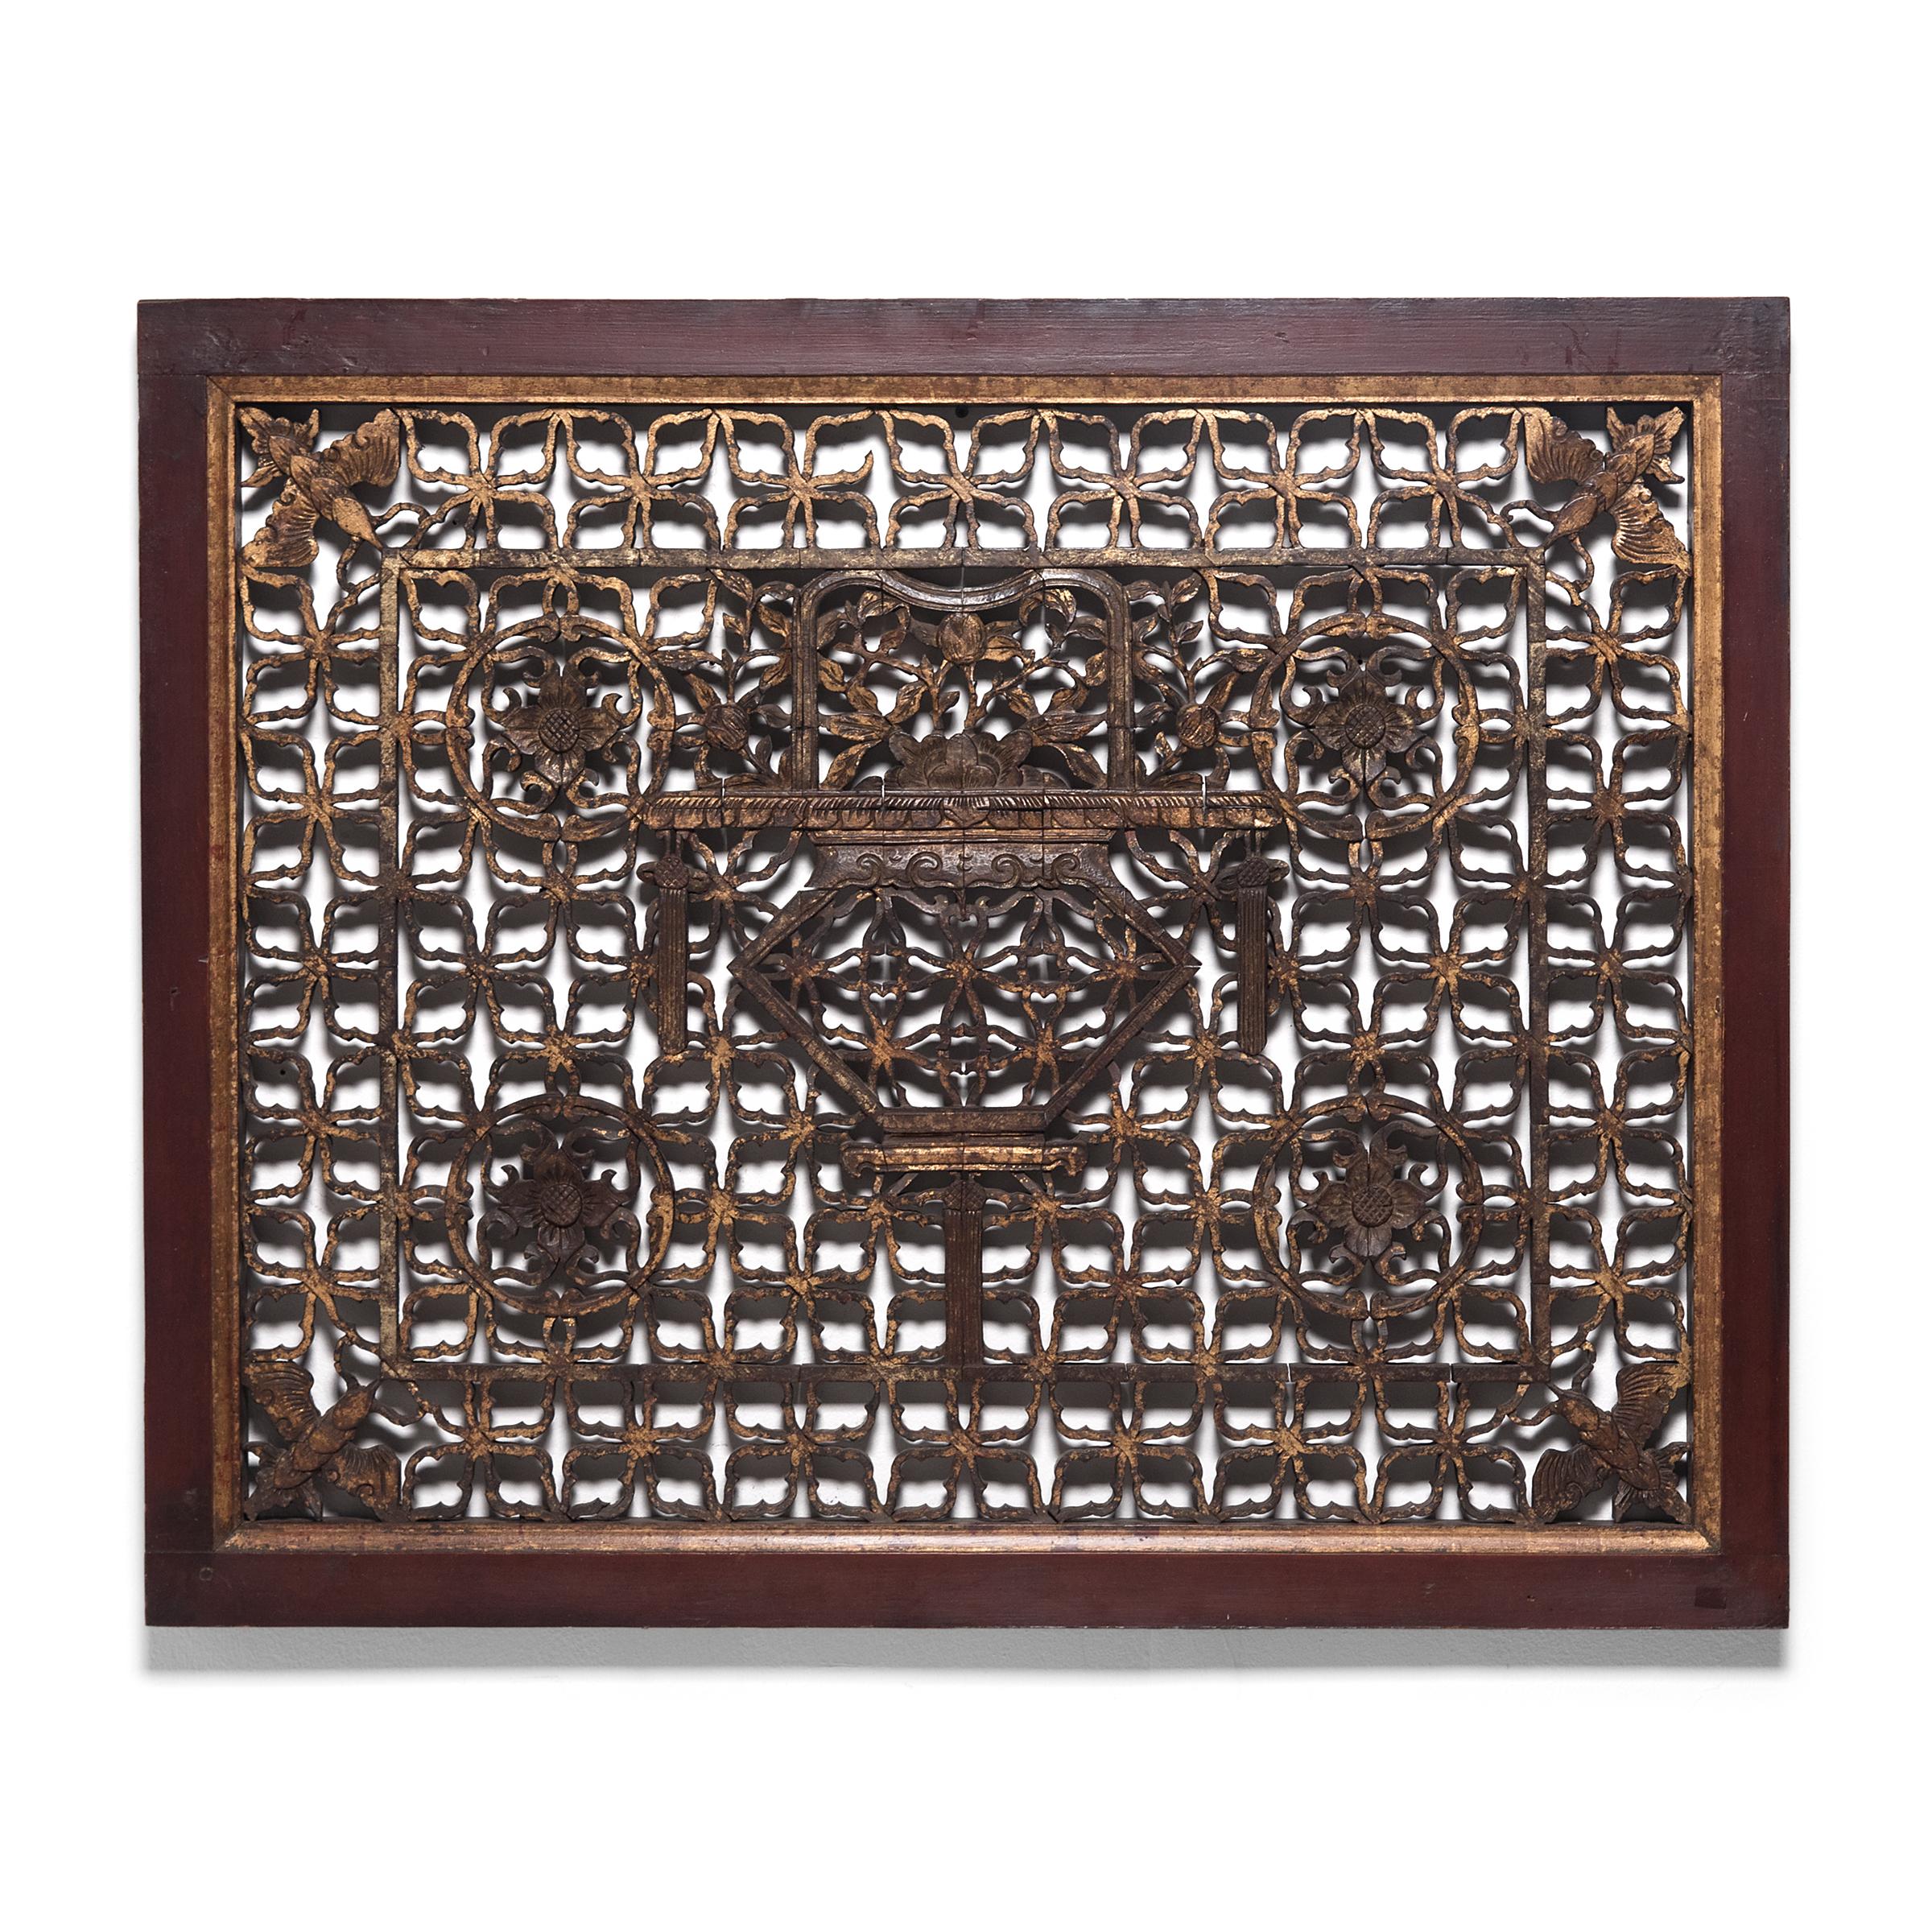 Decorated with oxblood-red lacquer and their original gold paint, this pair of ornate window panels is a beautiful example of traditional Chinese latticework. Set into a wall or door, lattice windows such as these allowed light and air into a room